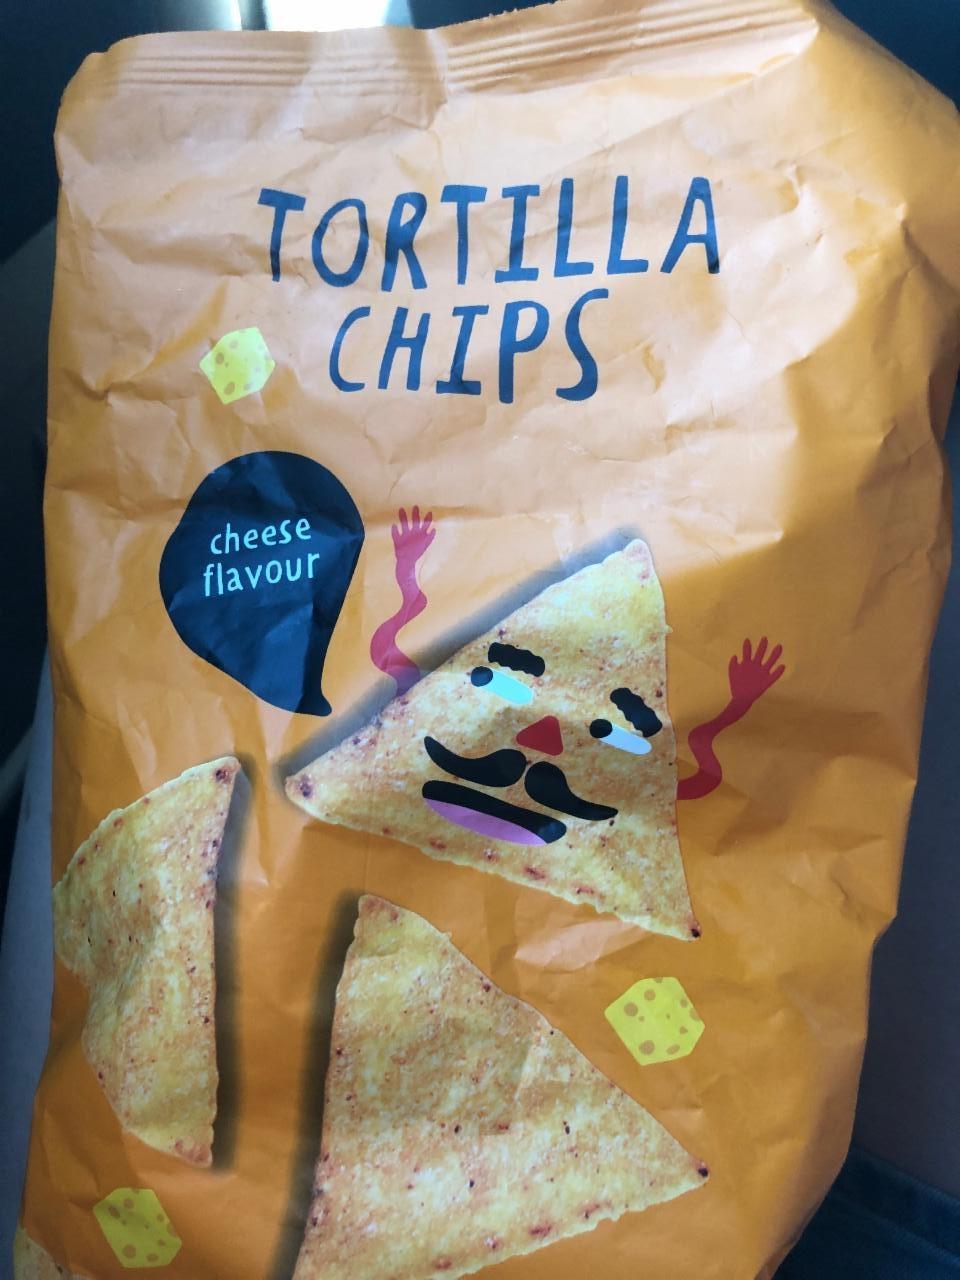 Képek - Tortilla chips cheese flavour Flying tiger